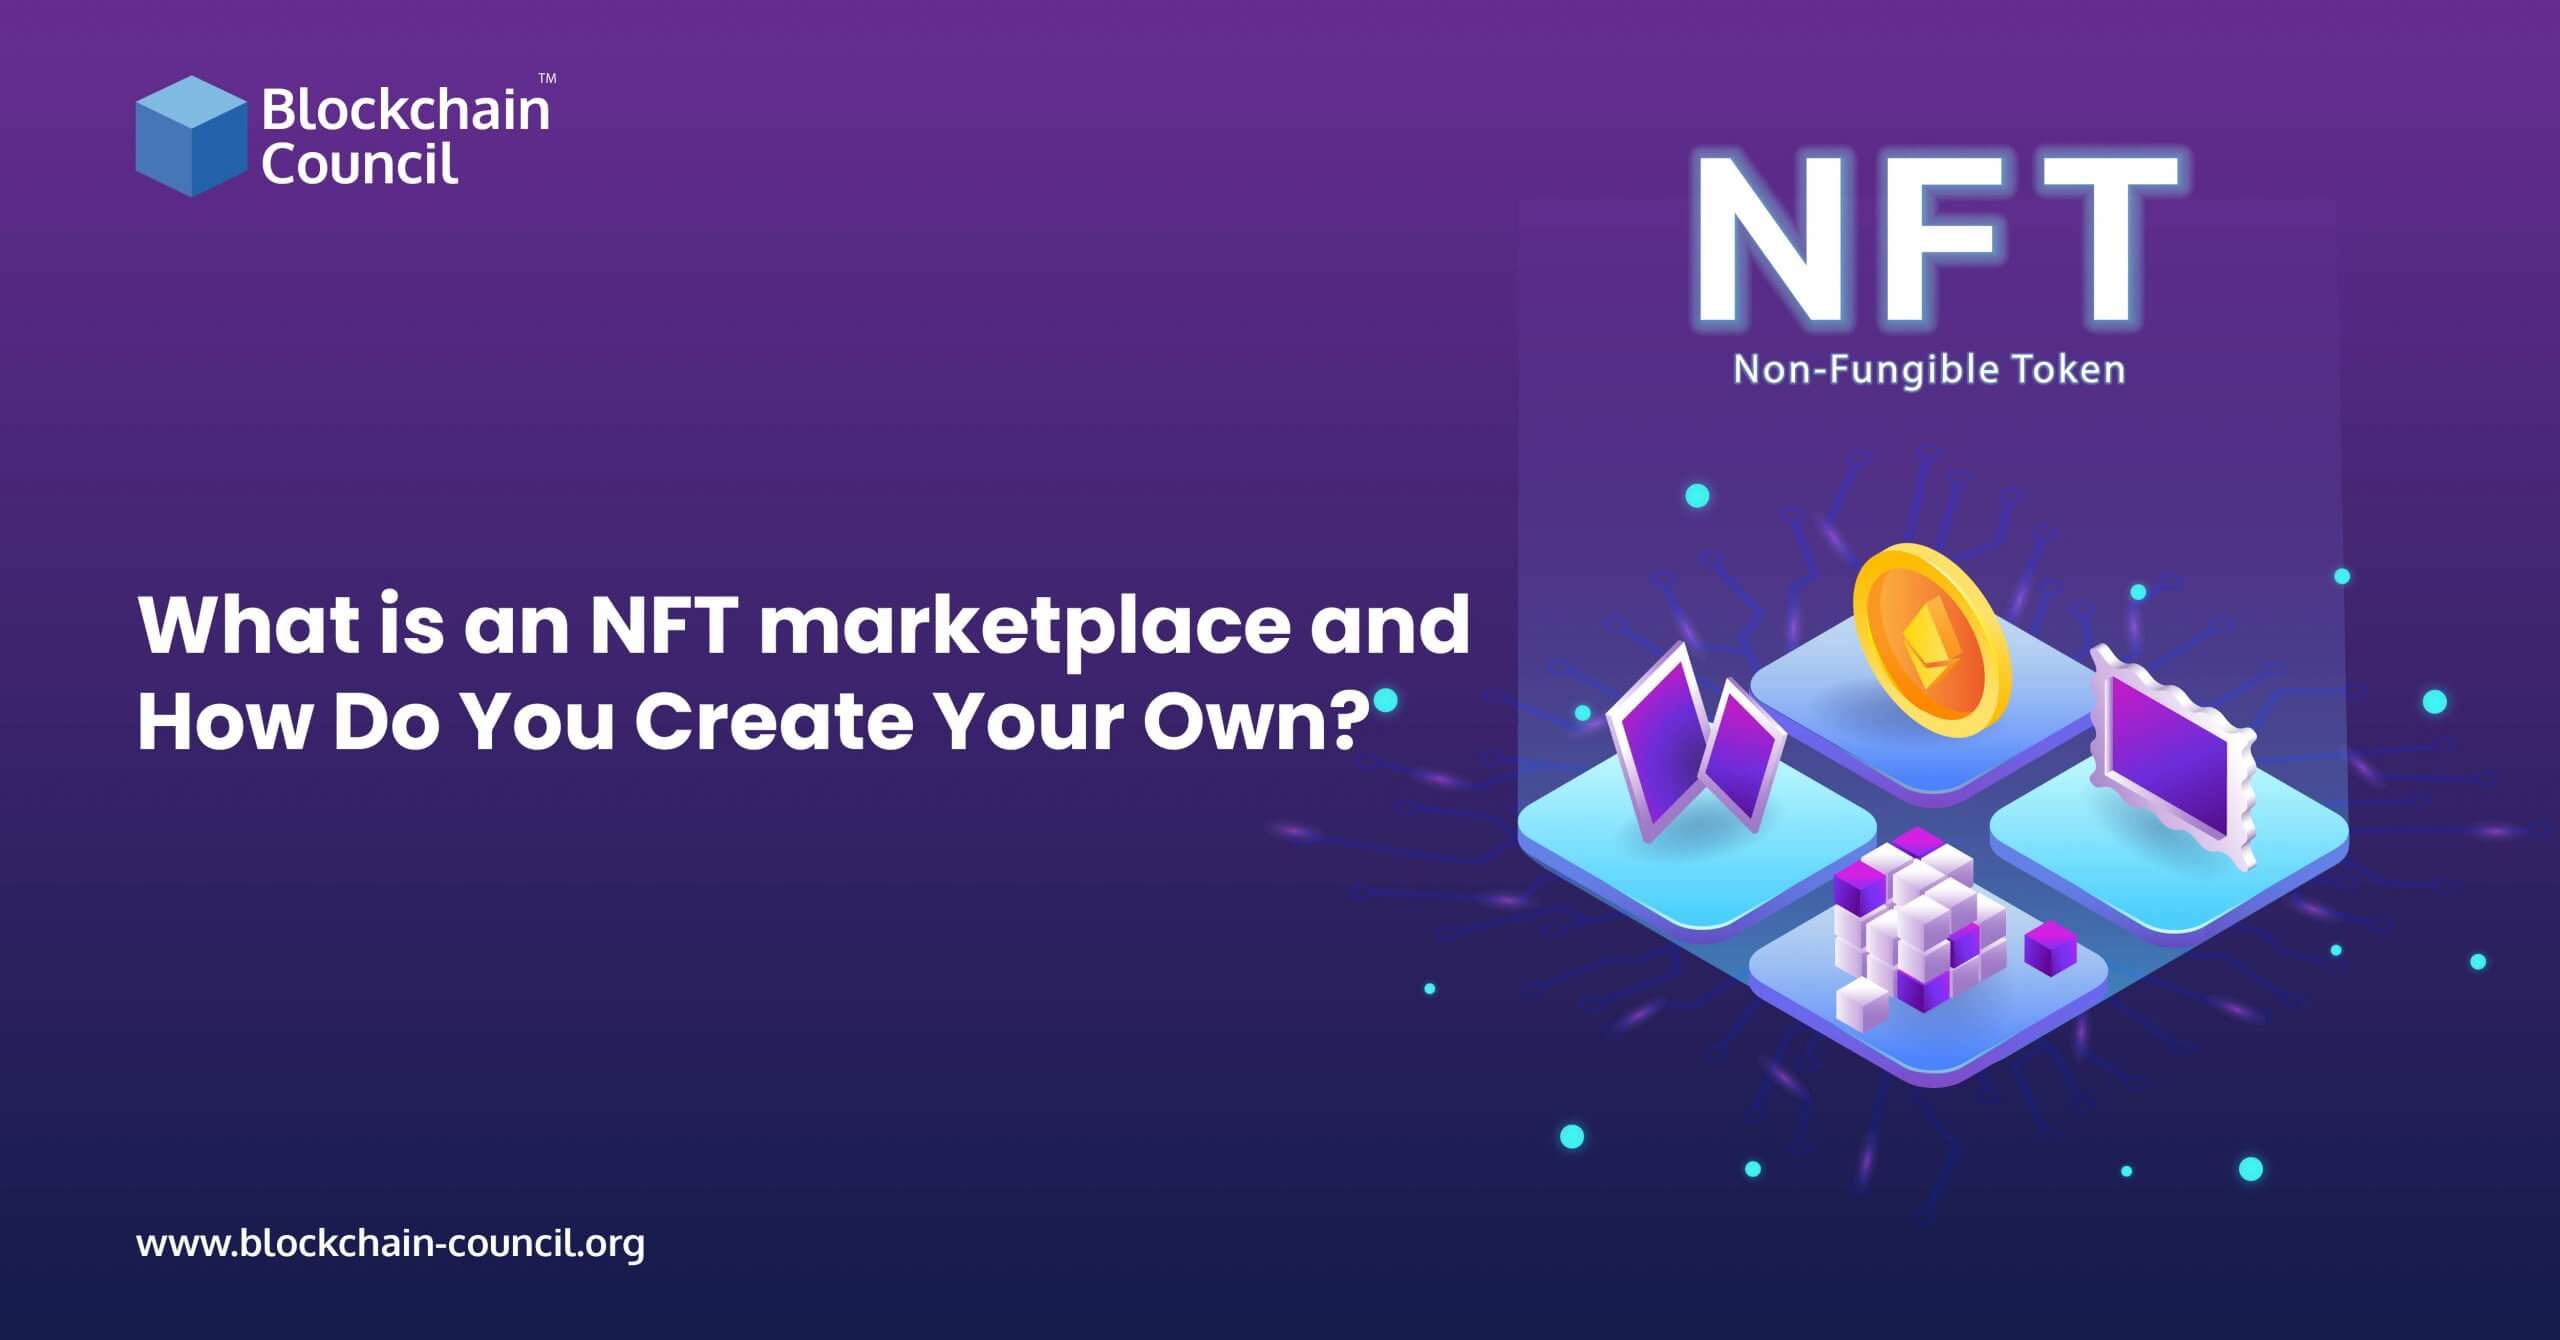 What is an NFT marketplace and How Do You Create Your Own